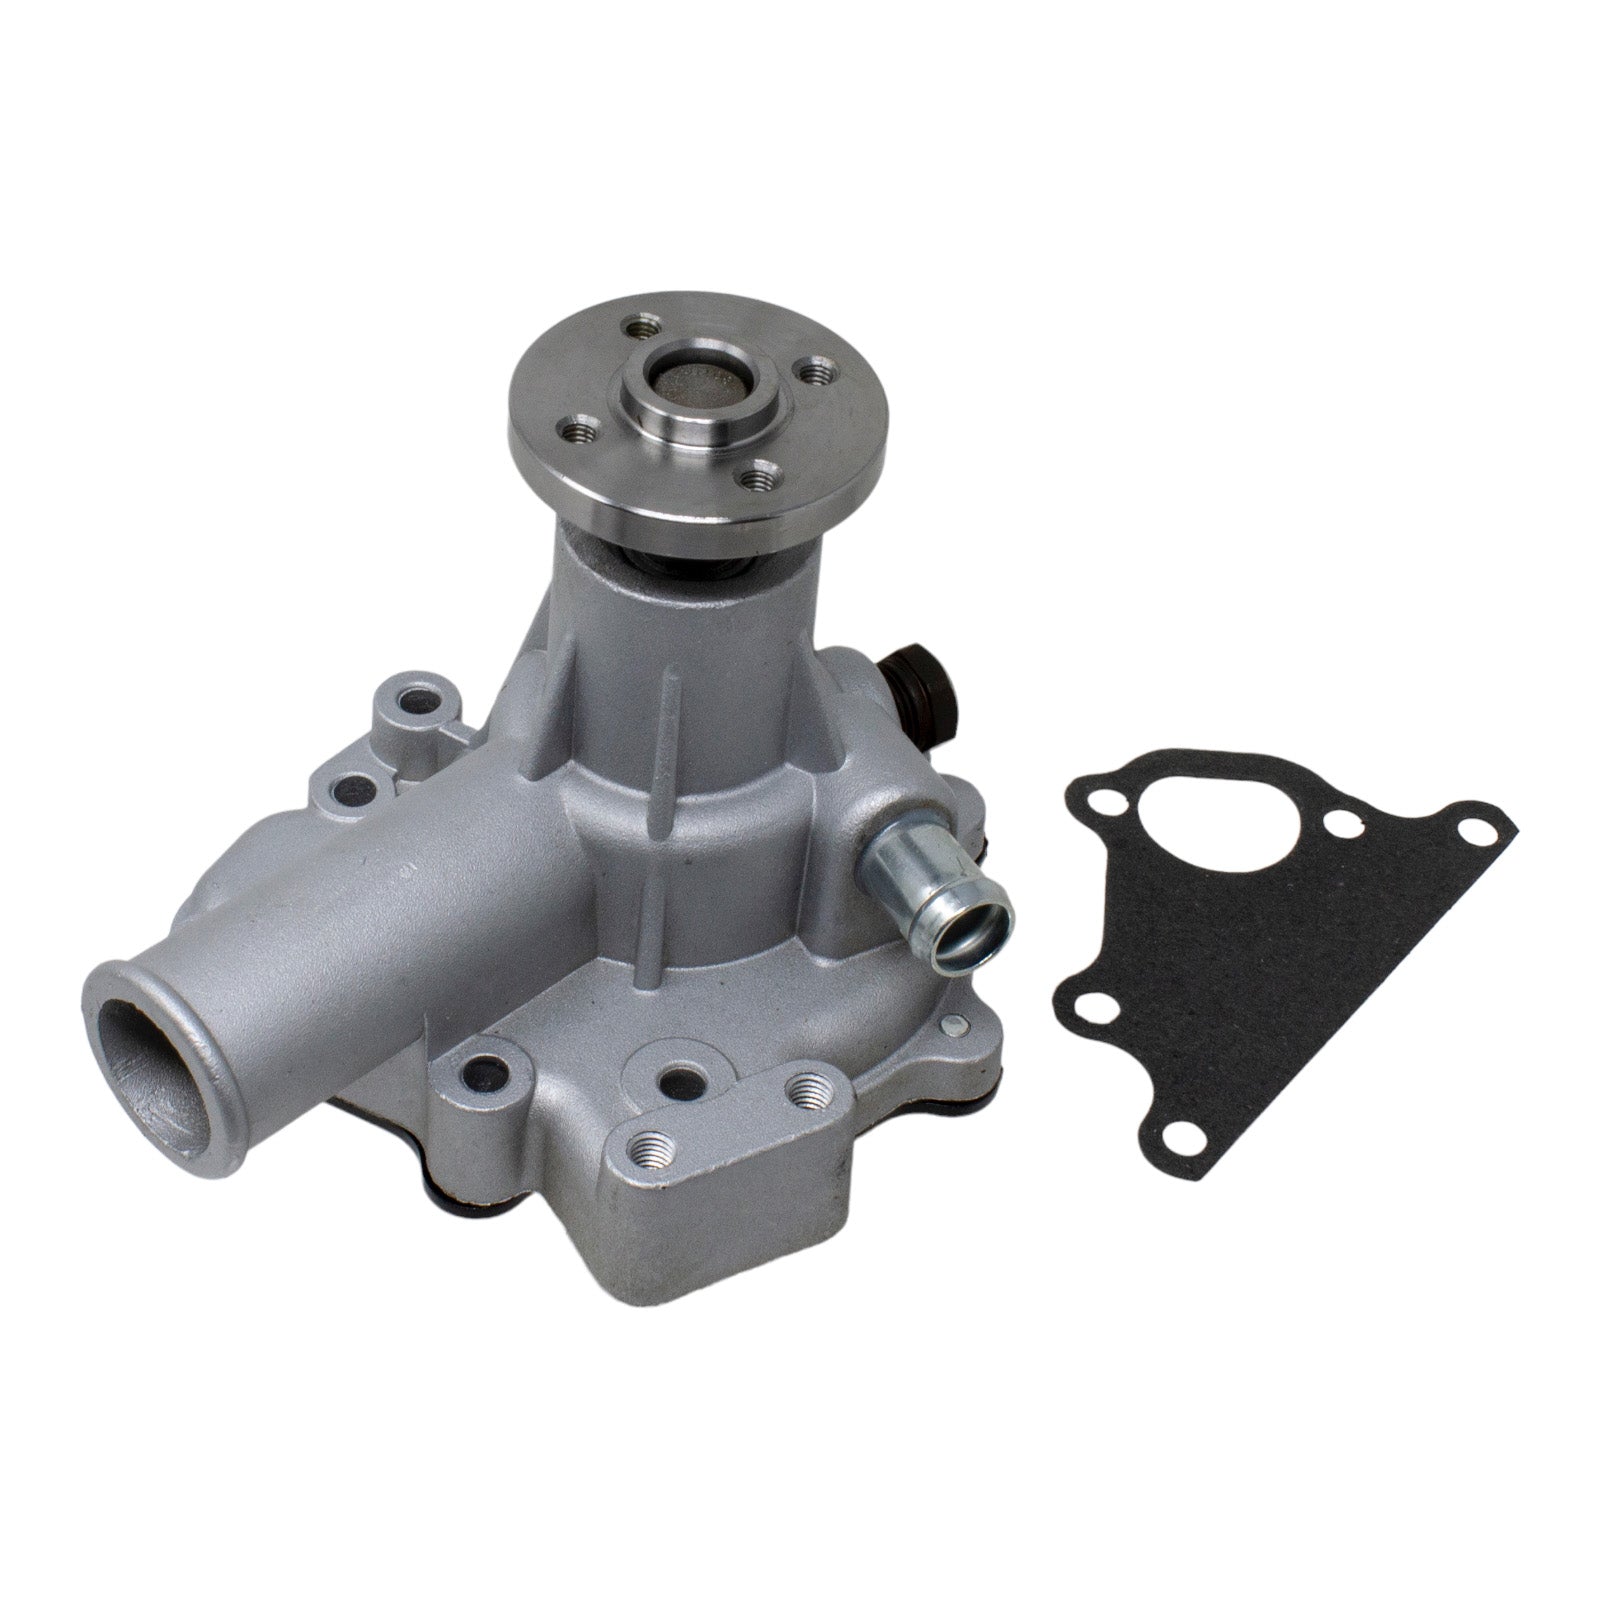 Duraforce SBA145017730, Water Pump For Ford